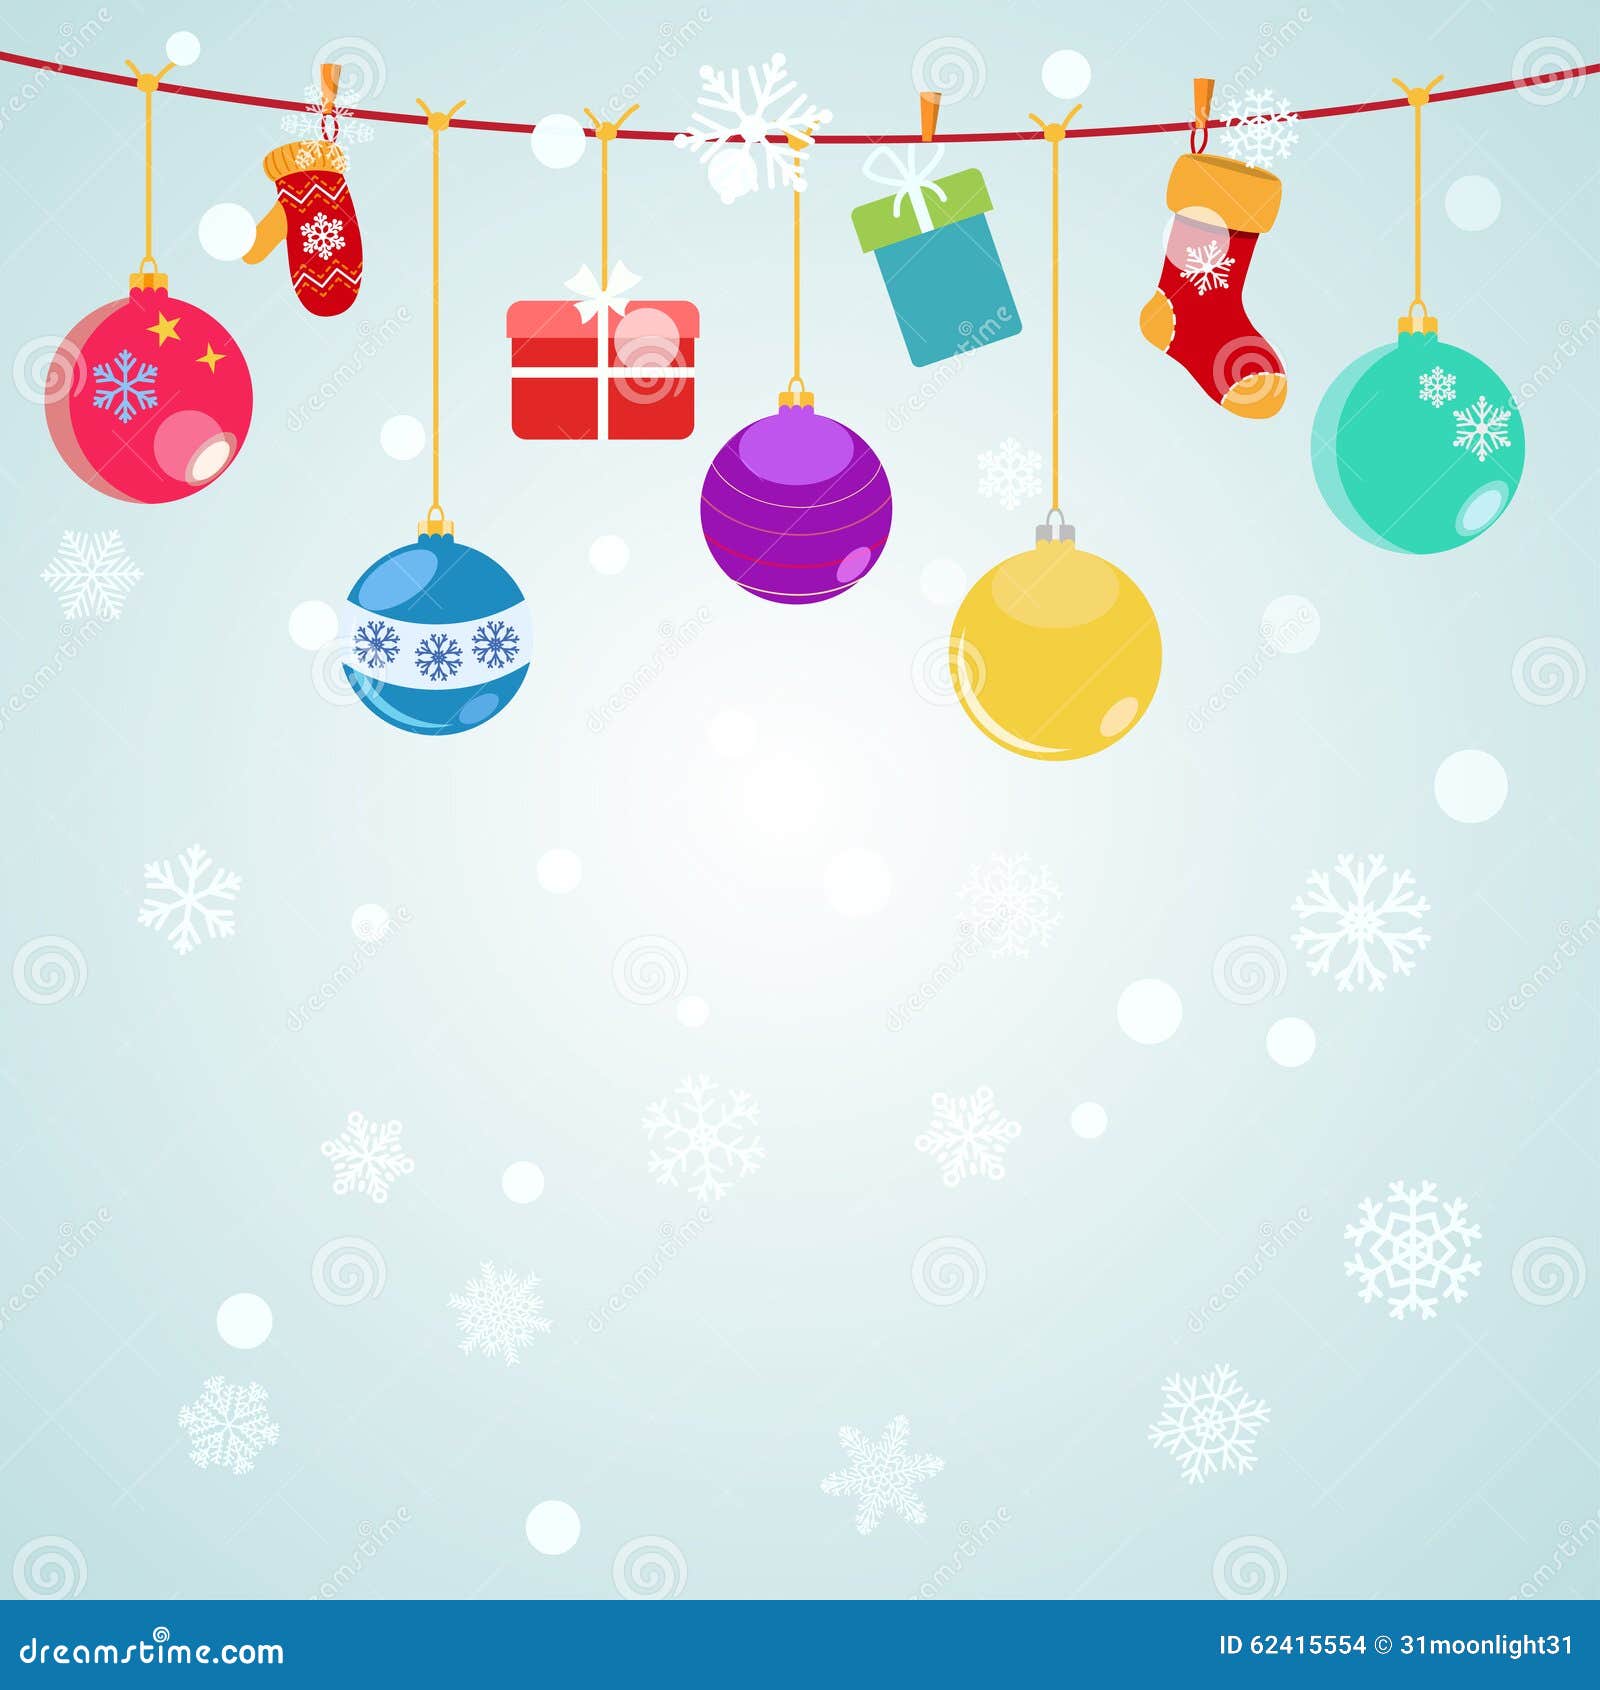 Christmas Background with Hanging Gift Boxes, Socks Stock Vector ...